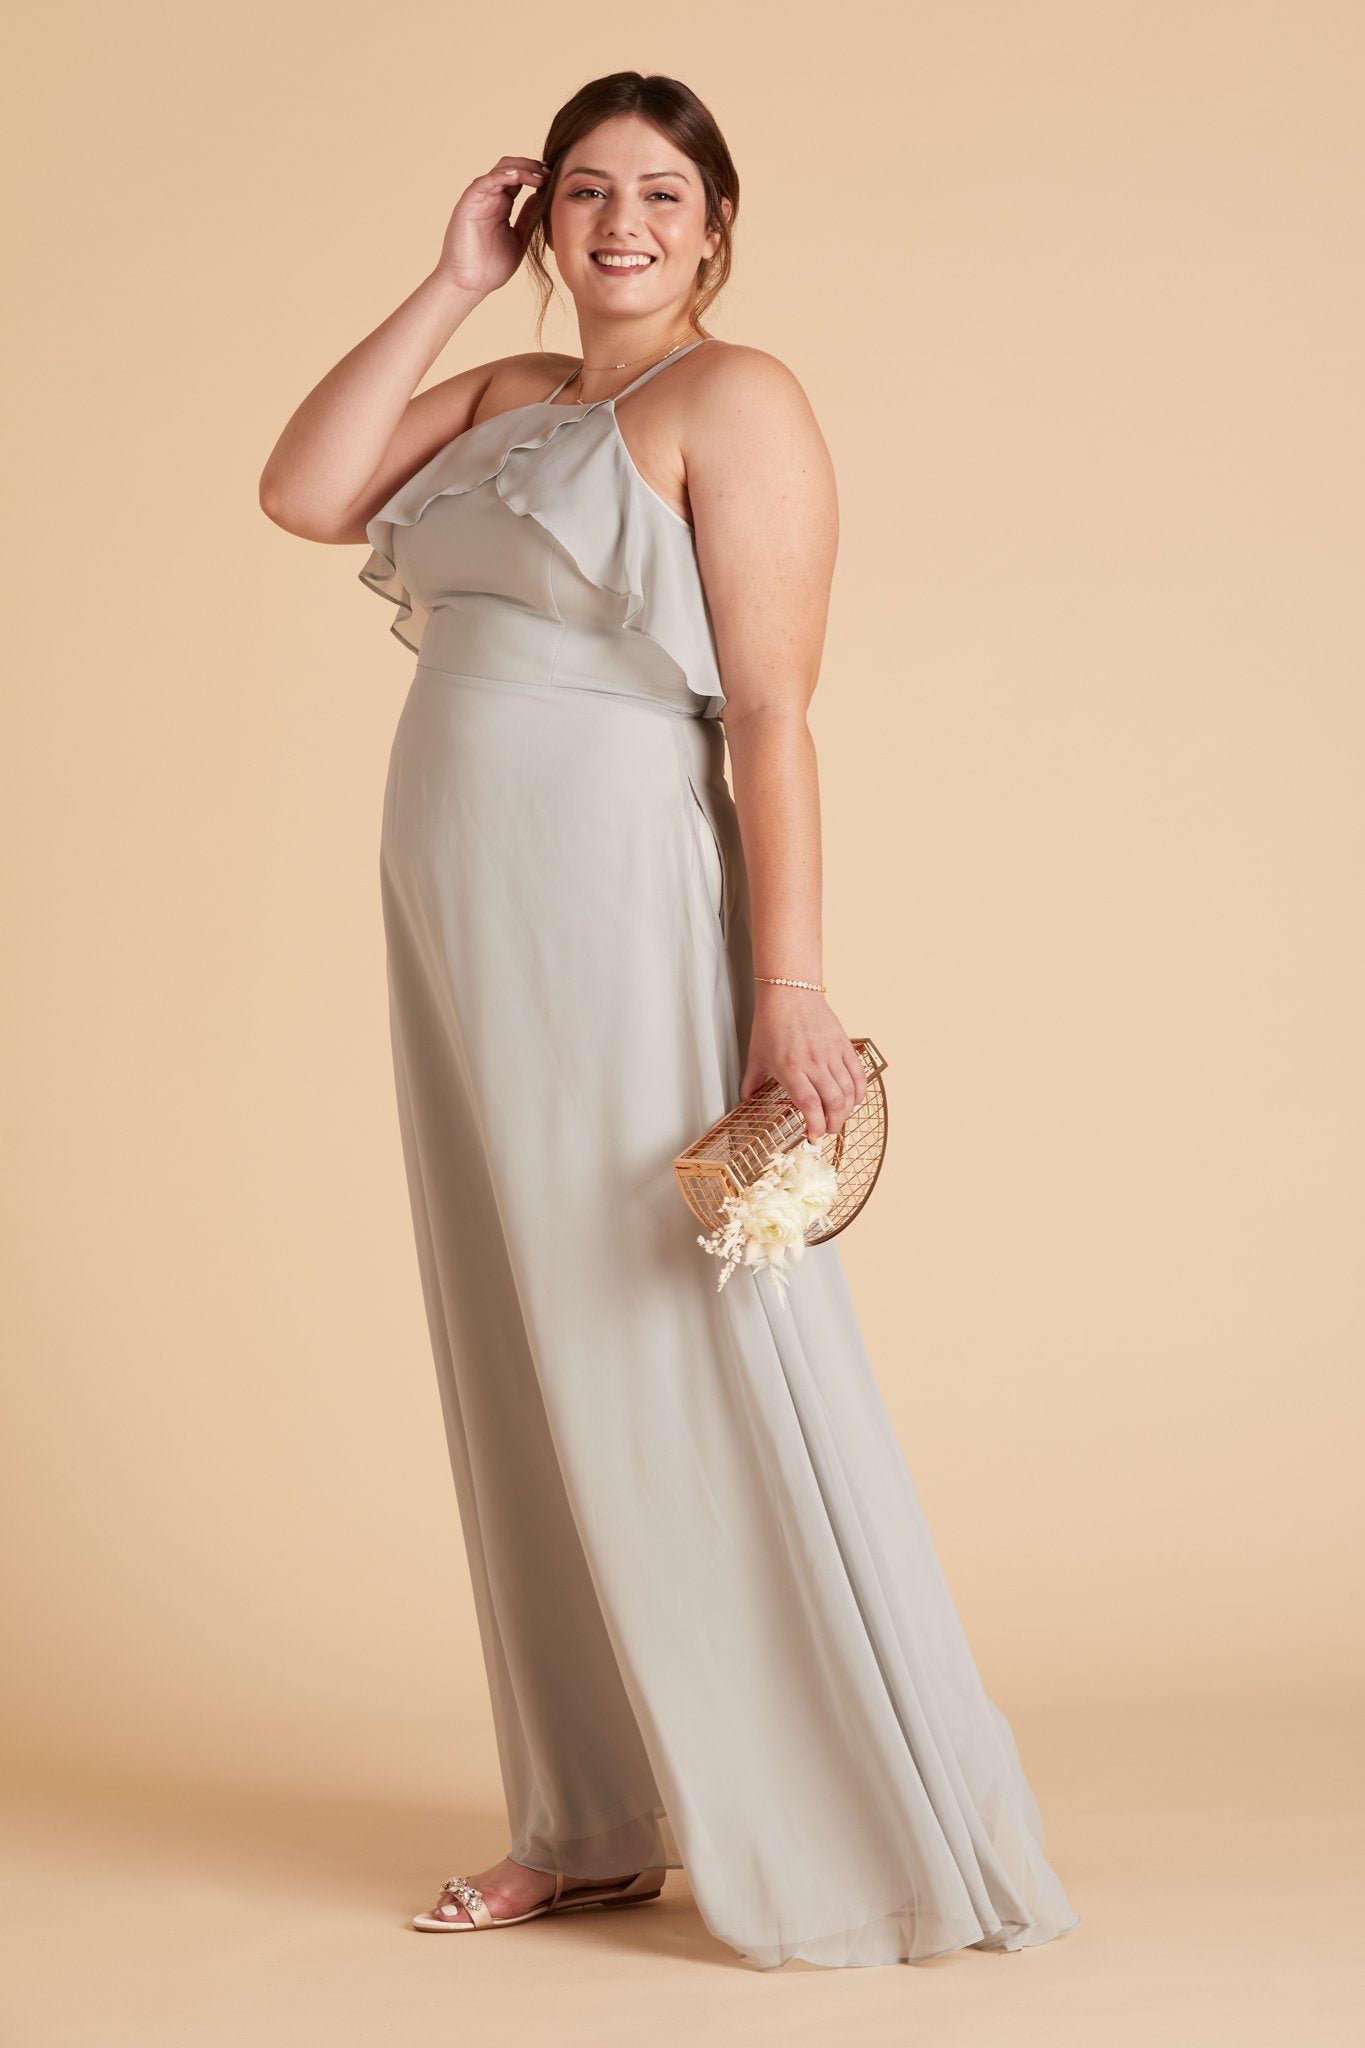 Jules plus size bridesmaid dress in dove gray chiffon by Birdy Grey, front view